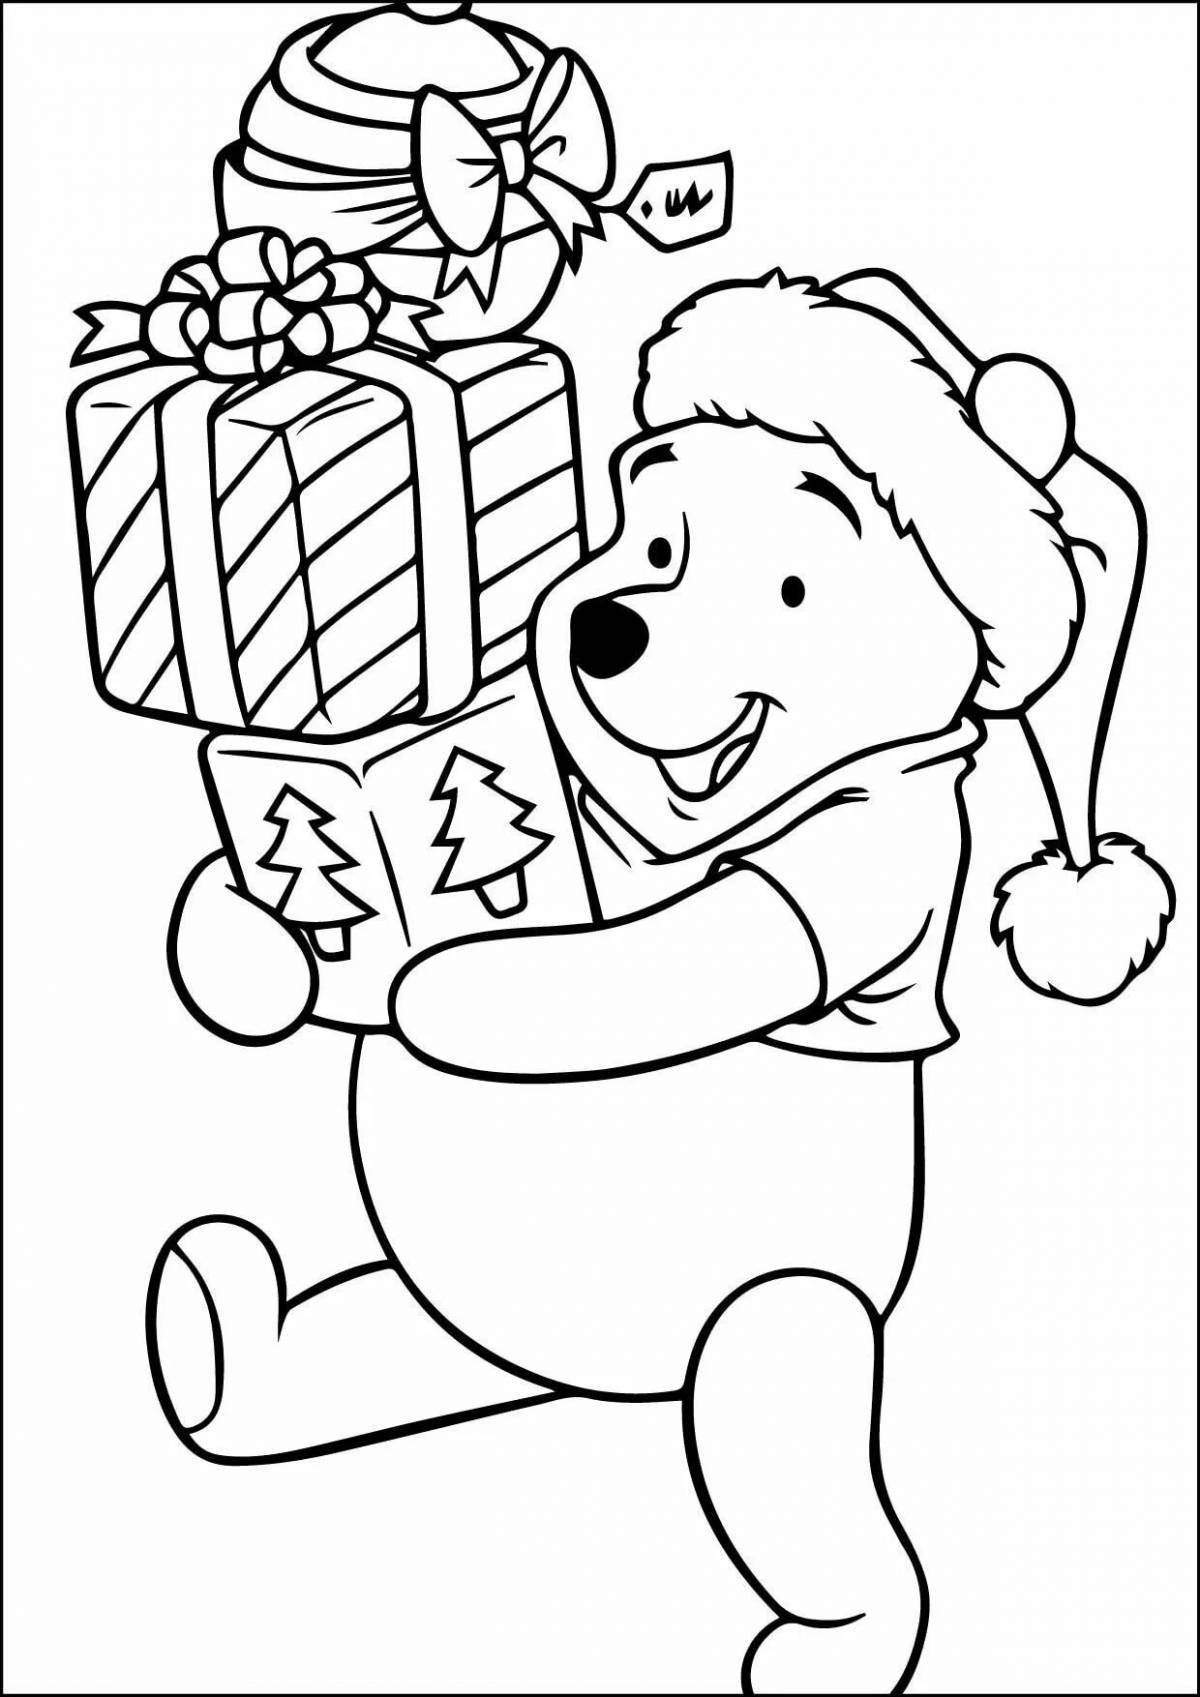 Fancy Christmas characters coloring book